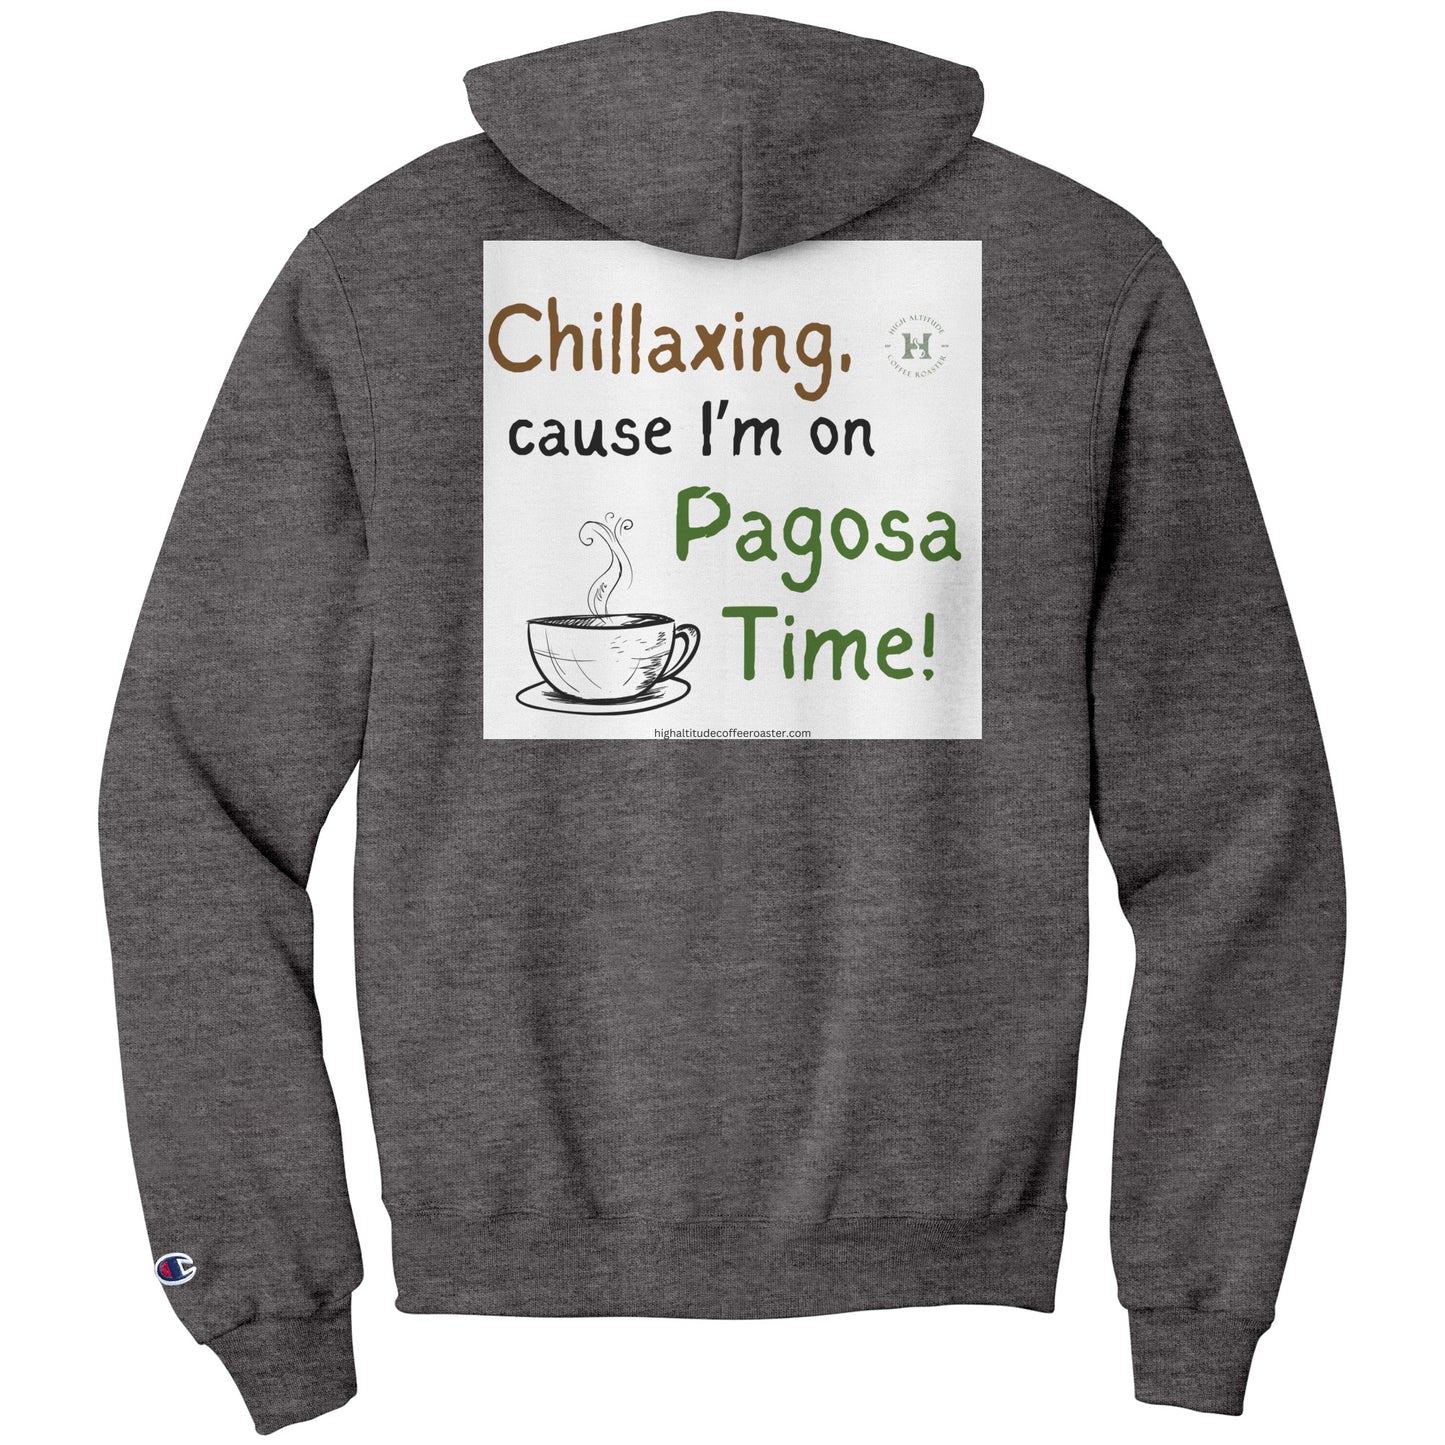 Chillaxing on Pagosa Time Hoodie